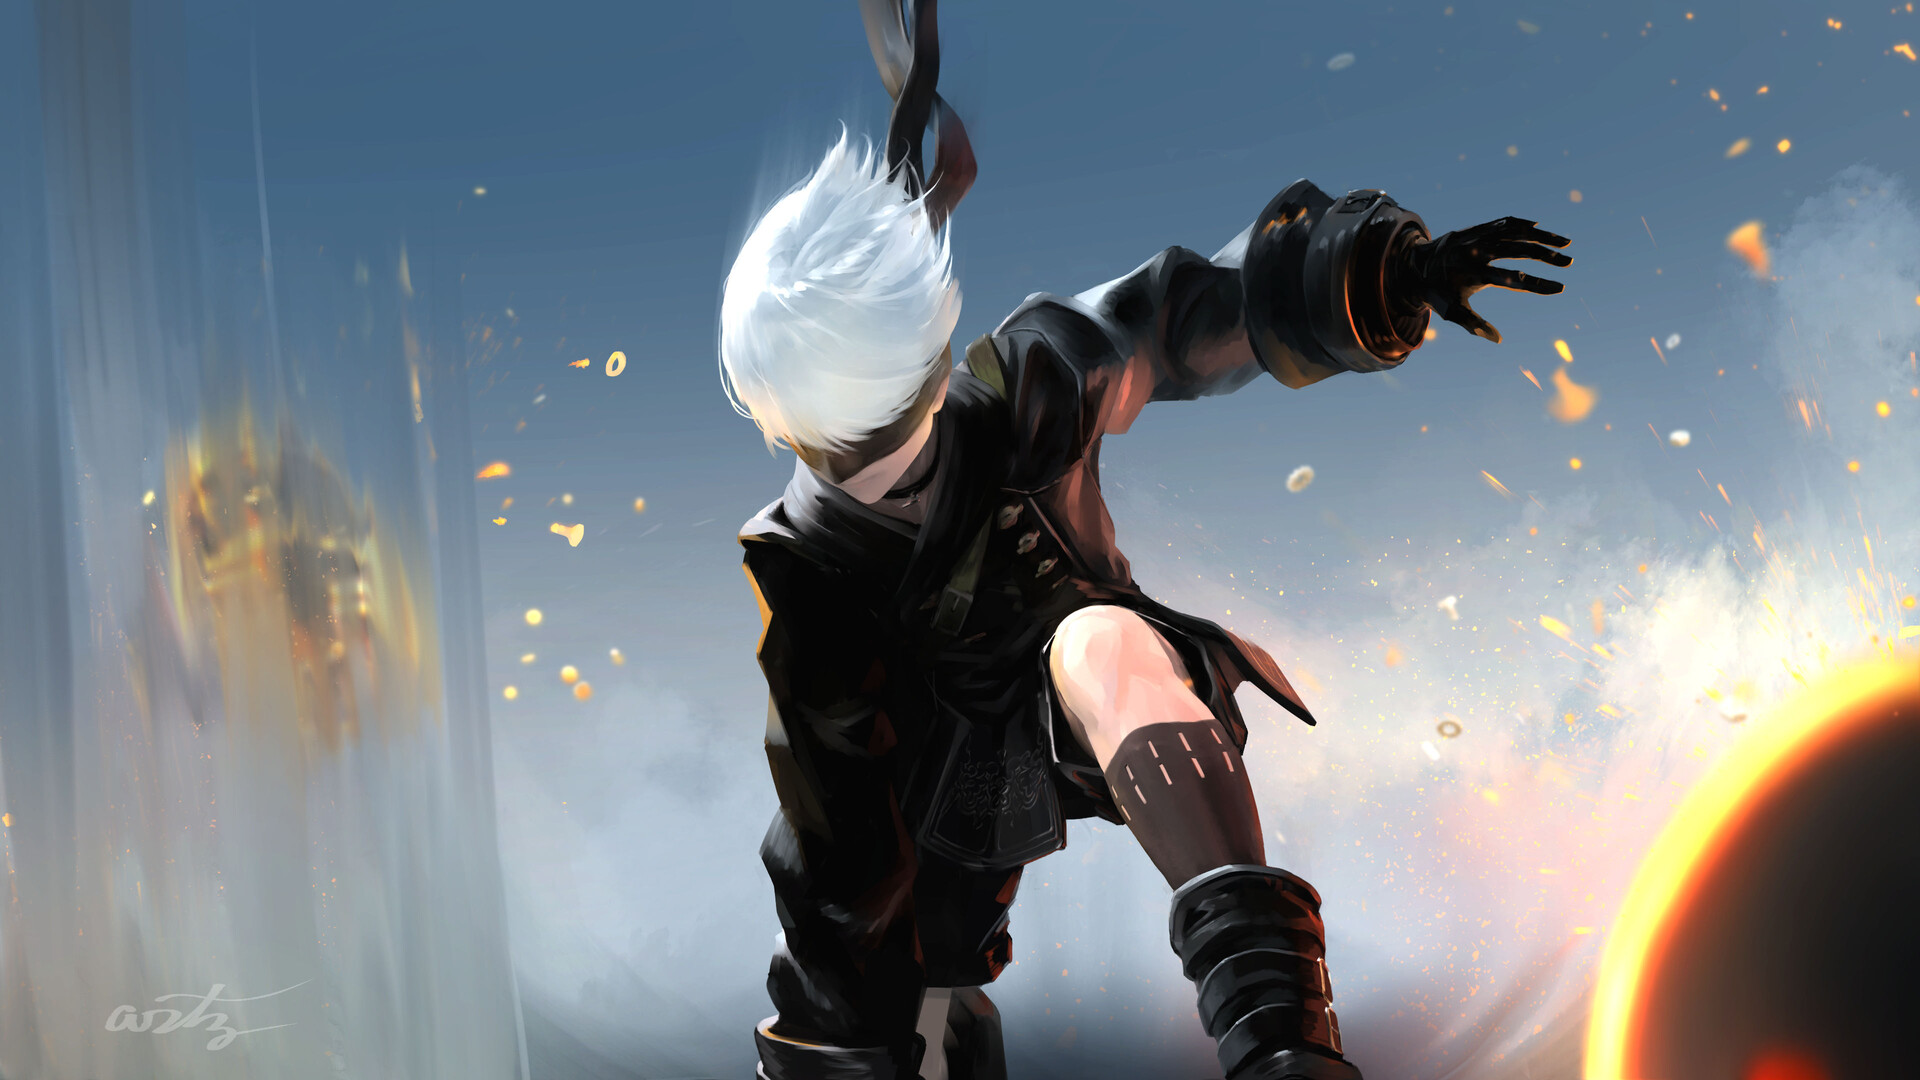 Been a while!! Made an ultrawide wallpaper of 2B in her Alternate Battler  outfit, inspired by the Automata cover art! Enjoy! : r/nier